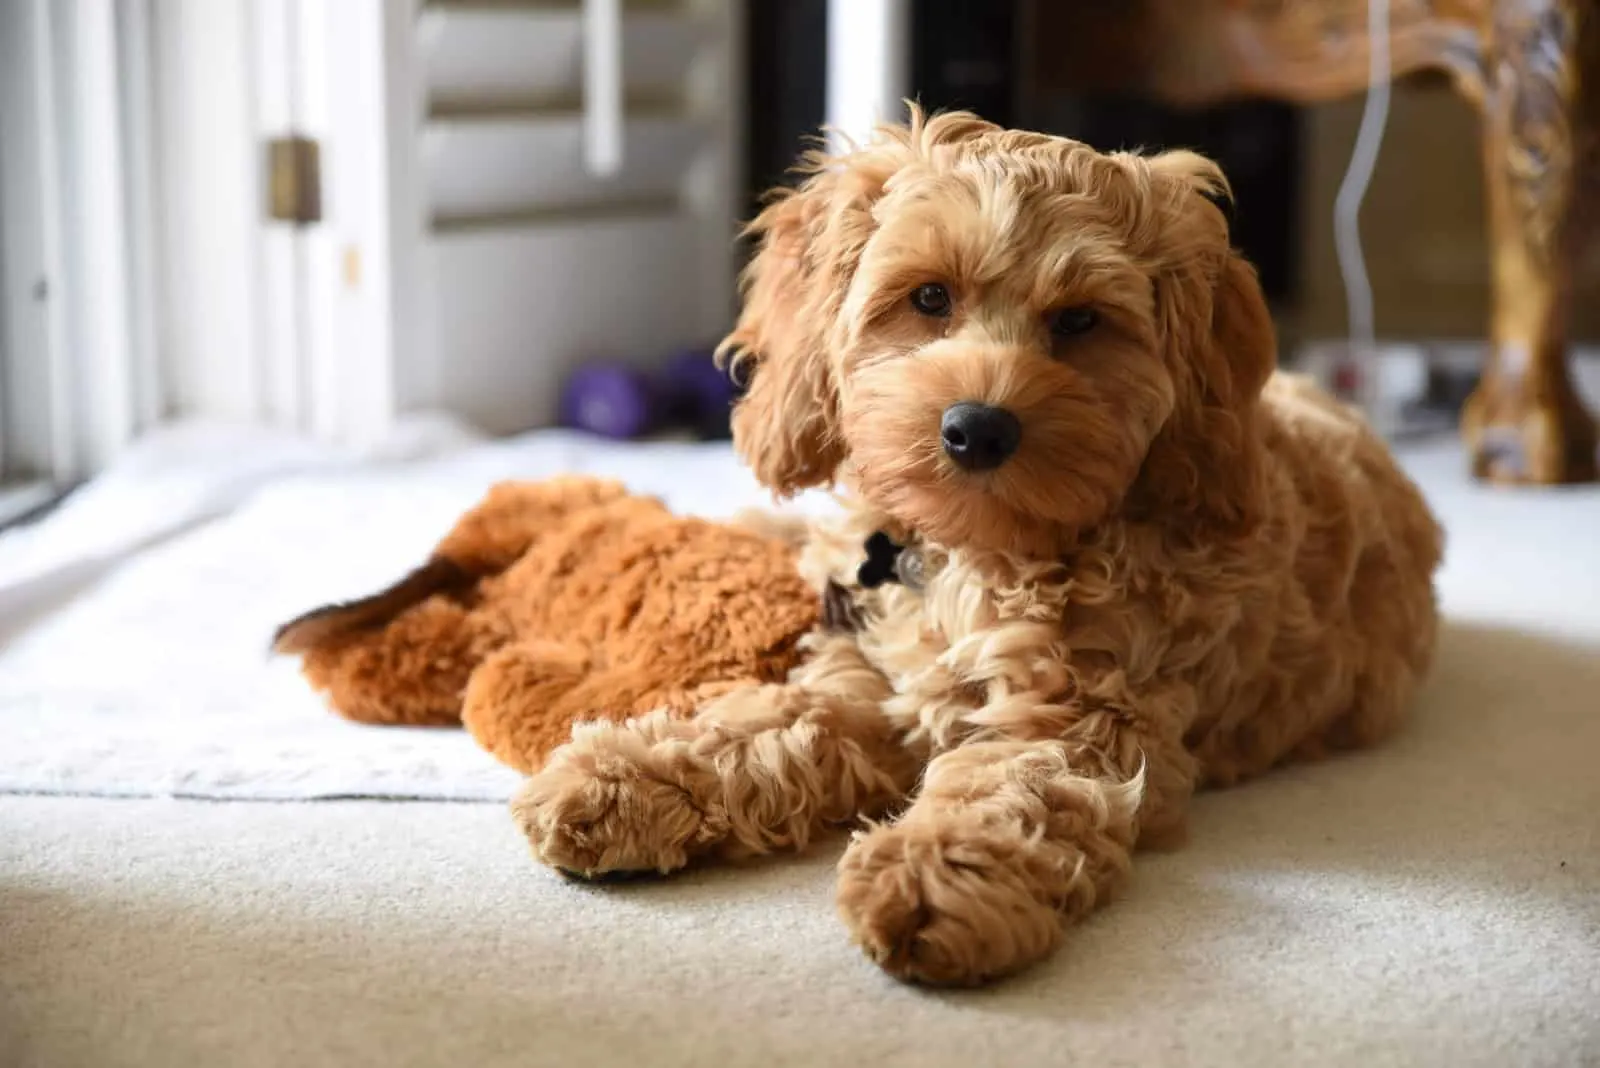 Cockapoo lying on floor and posing for camera